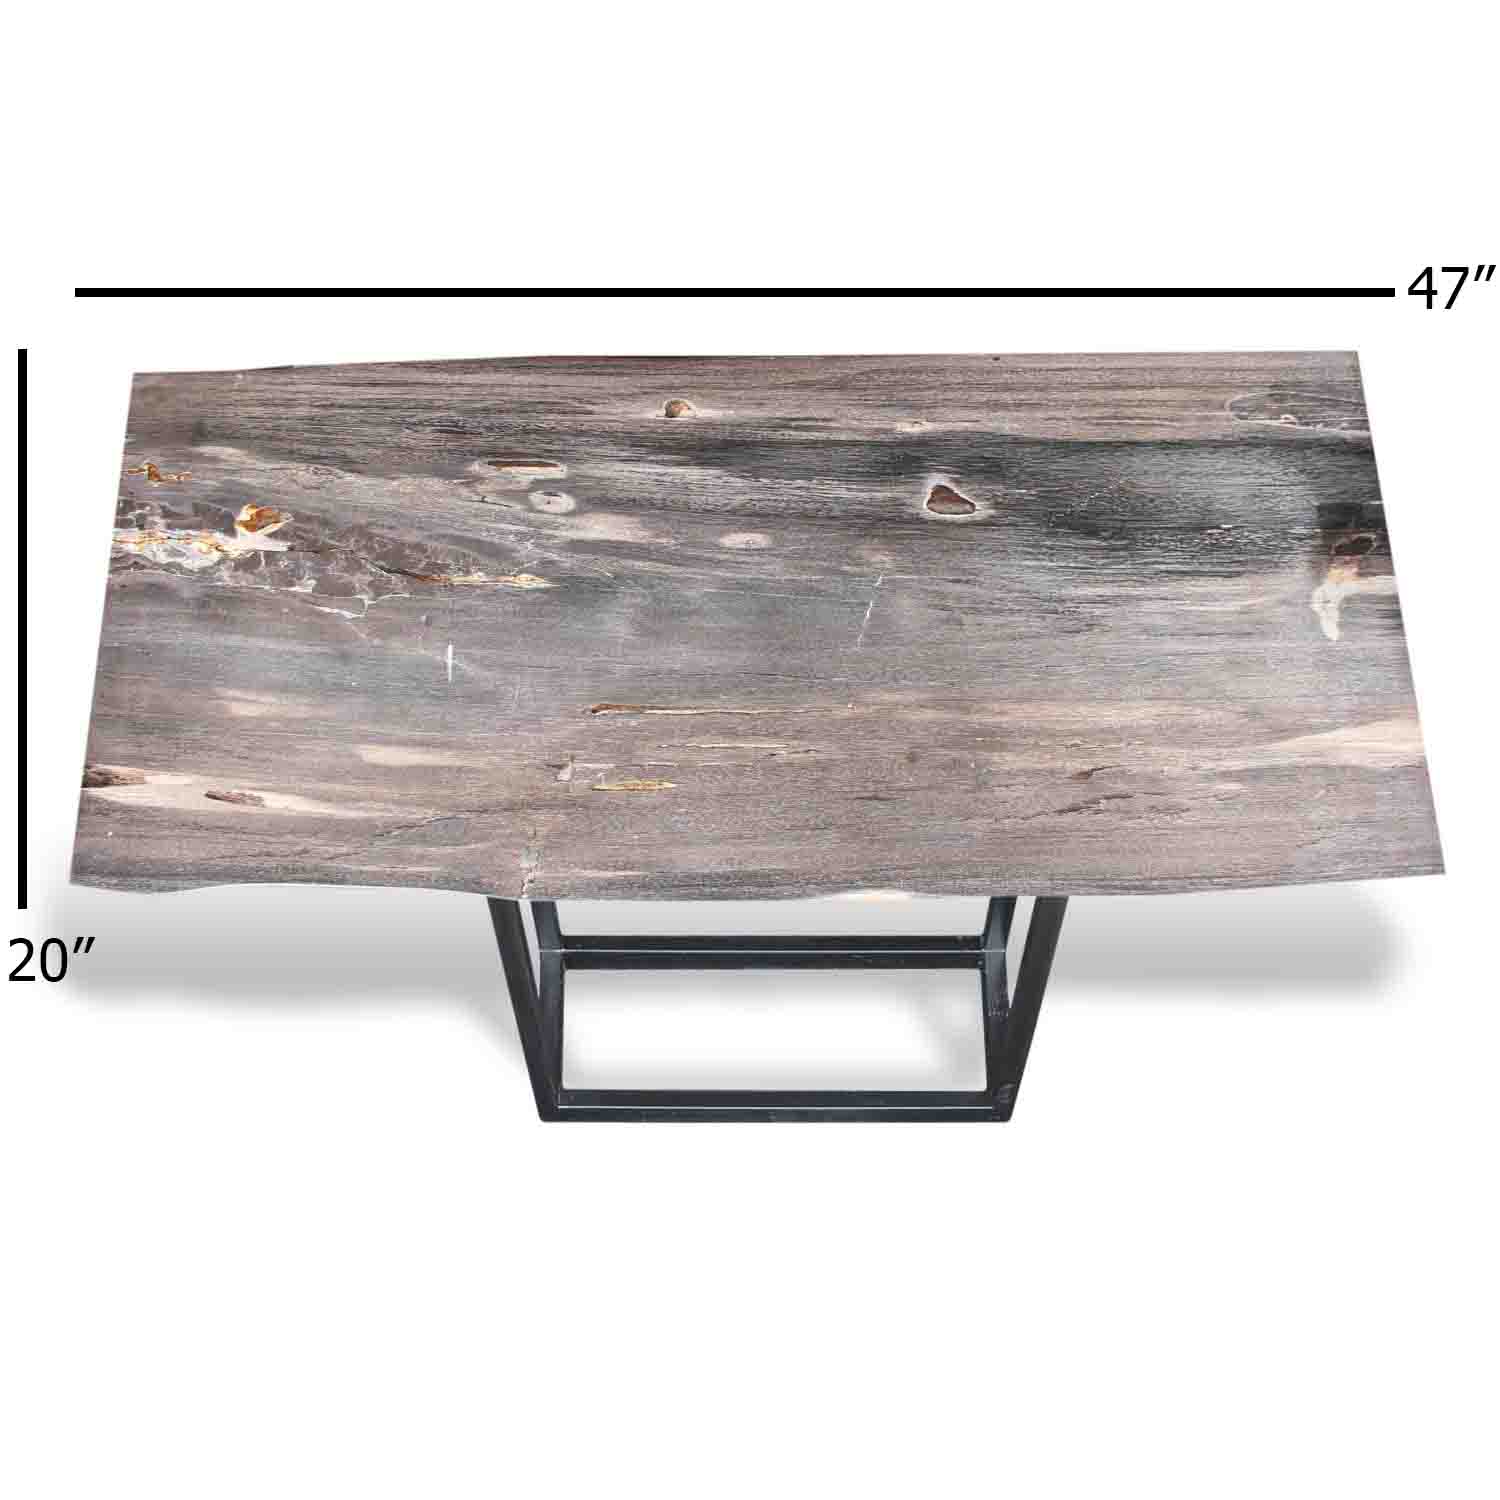 Kalifano Petrified Wood Natural Polished Petrified Wood Console Table from Indonesia - 47" / 146 lbs PWR7900.001